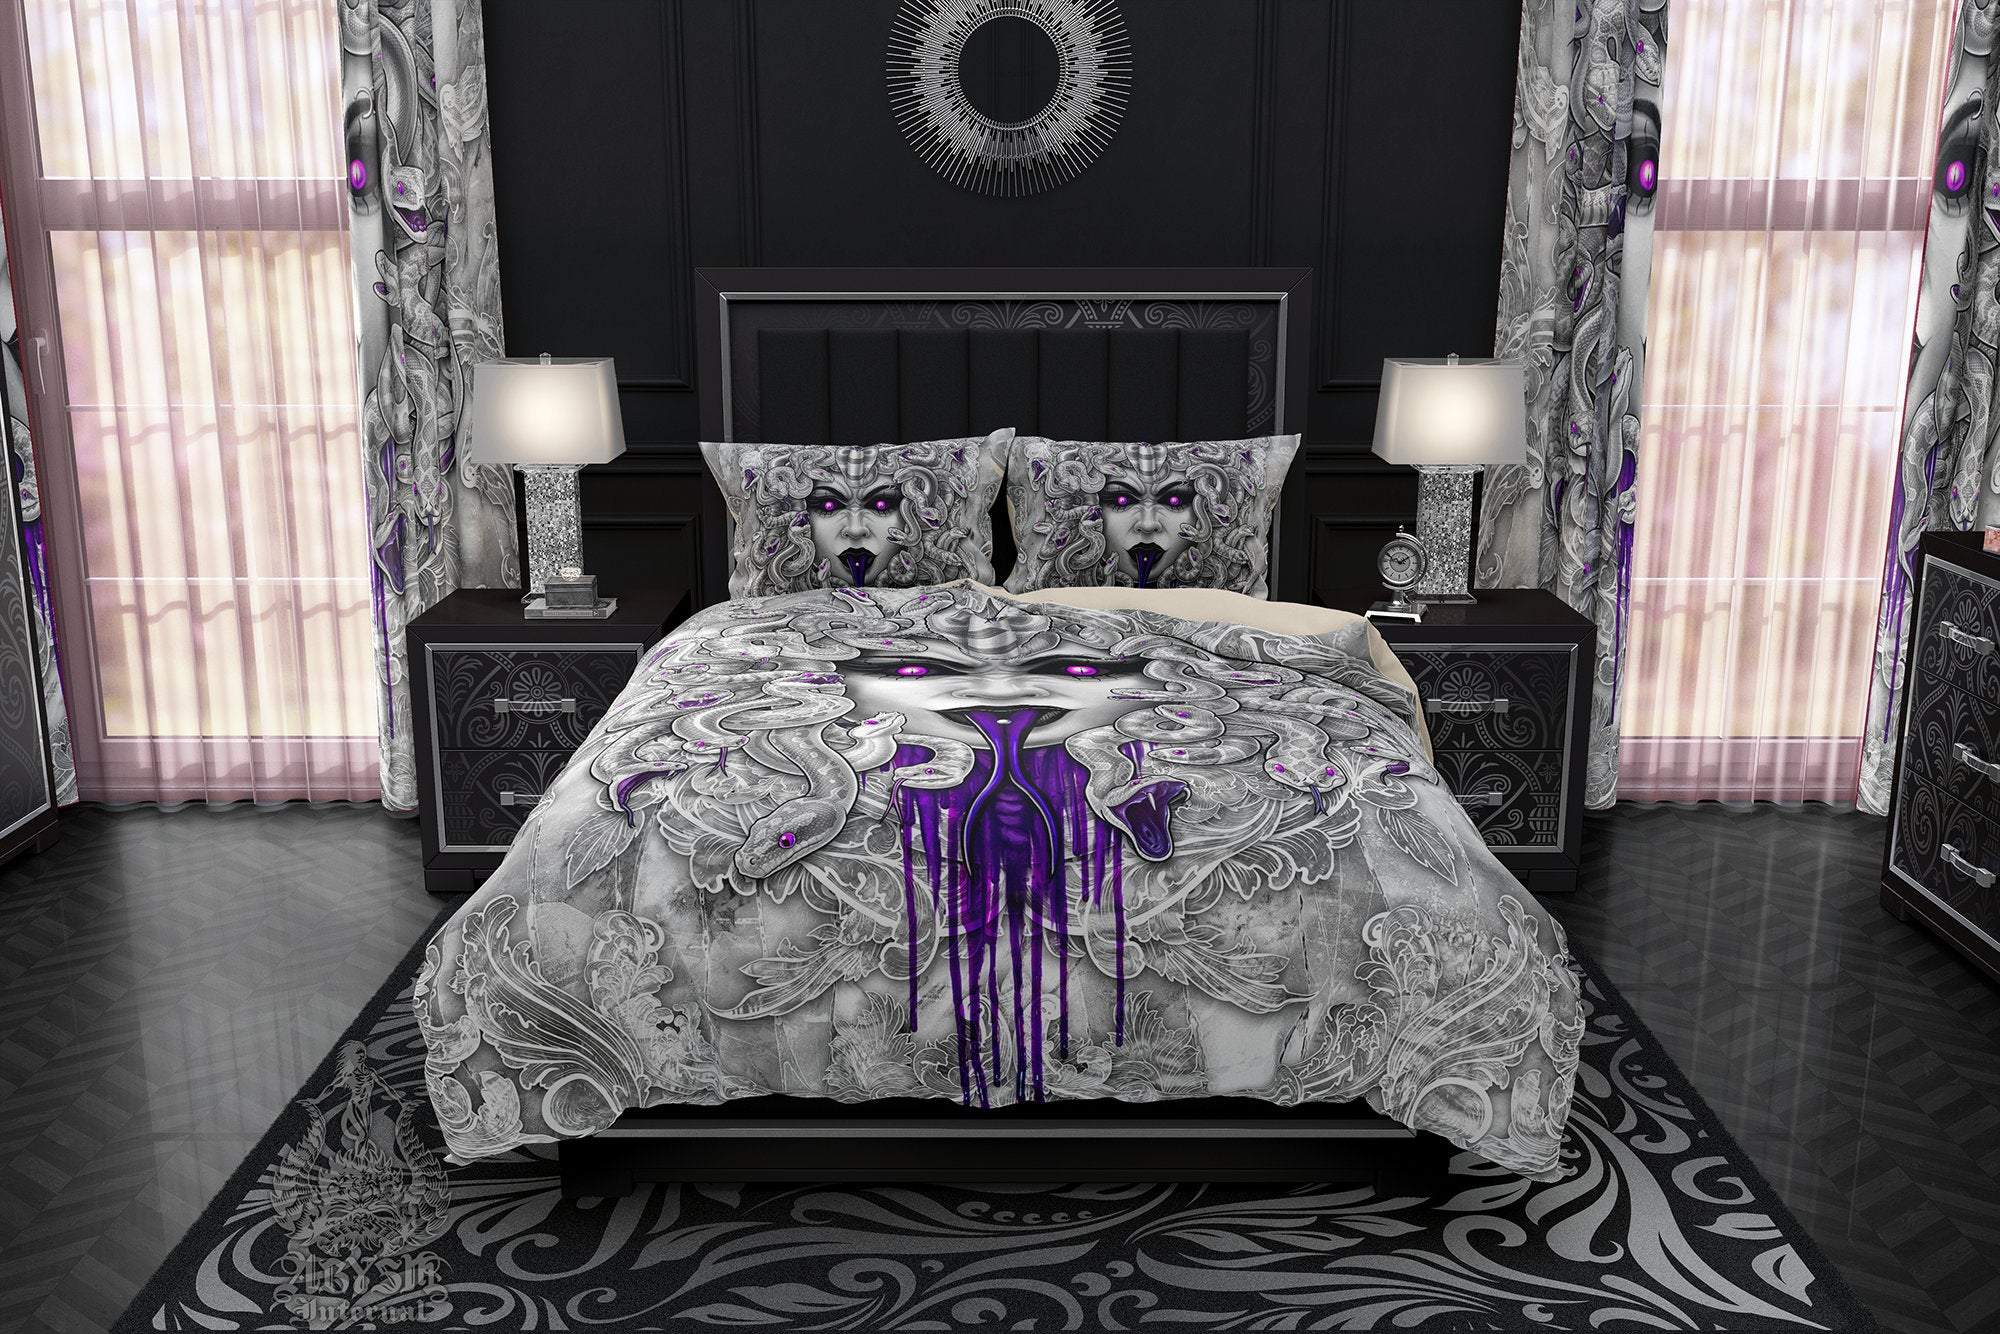 White Goth Bedding Set, Comforter and Duvet, Gothic Bed Cover and Bedroom Decor, King, Queen and Twin Size - Purple, Medusa, 3 Faces - Abysm Internal